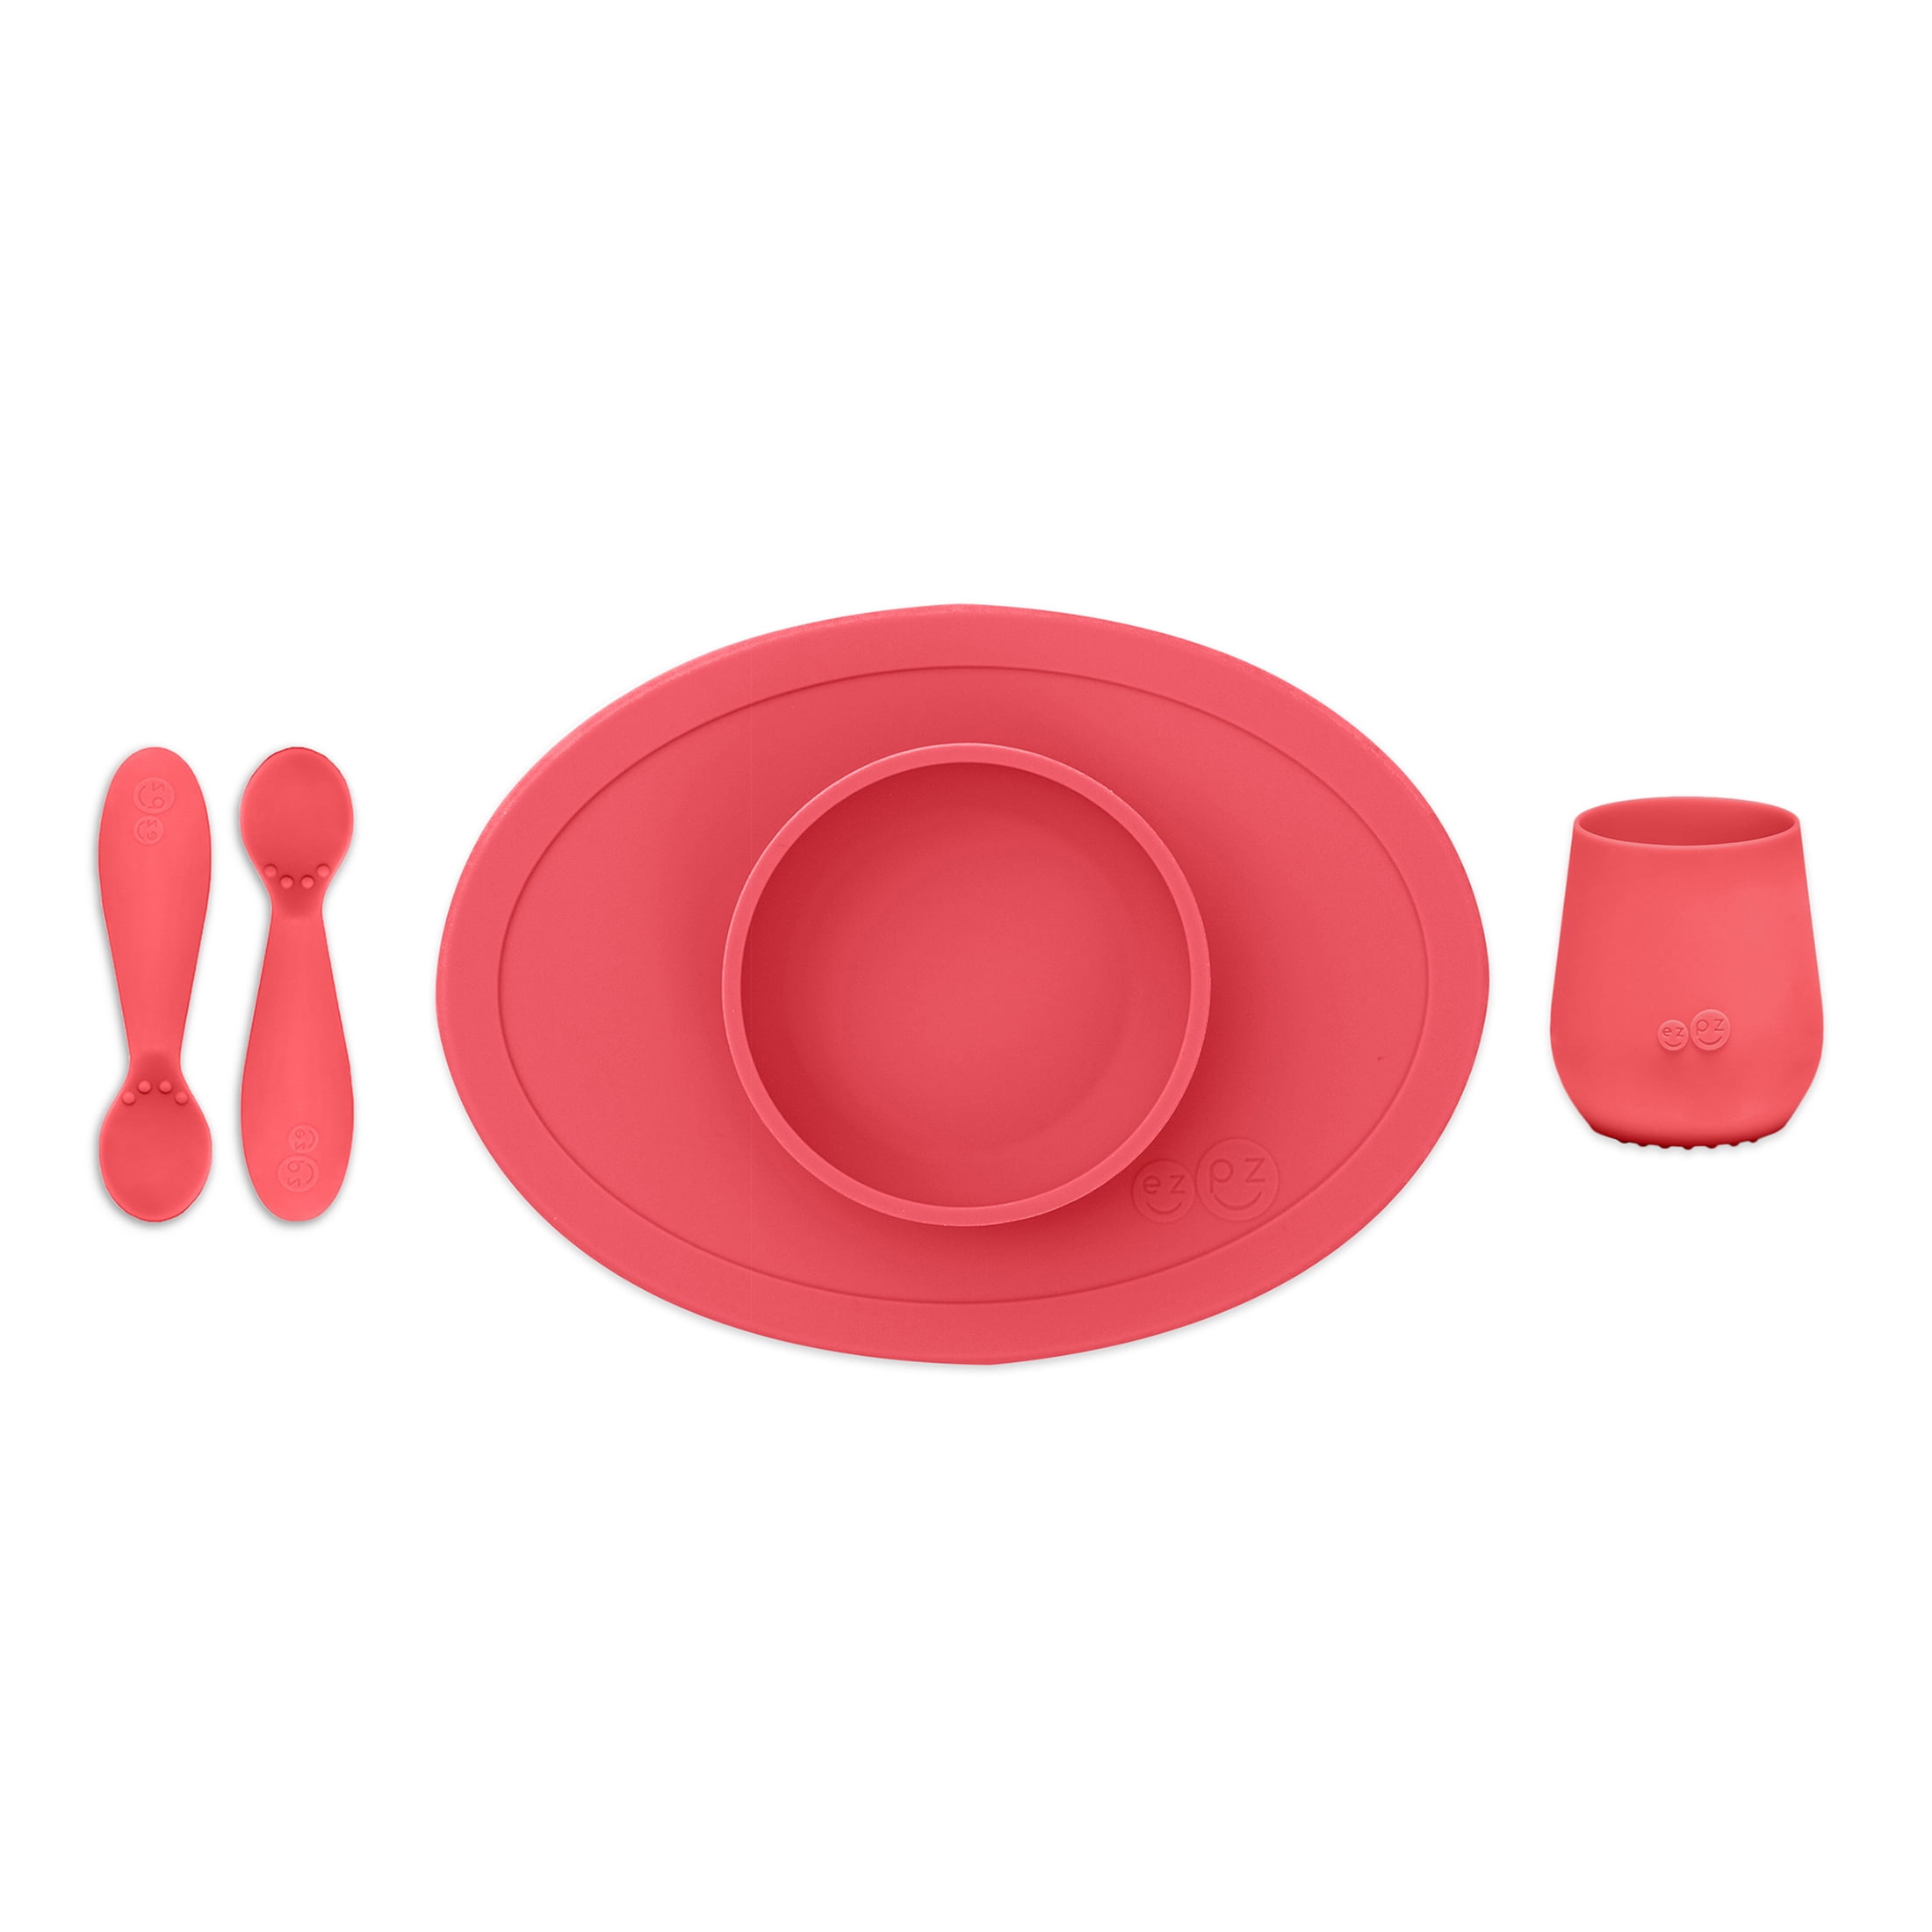 Ezpz First Foods Set (Sage) - 100% Silicone Mealtime Set - Includes